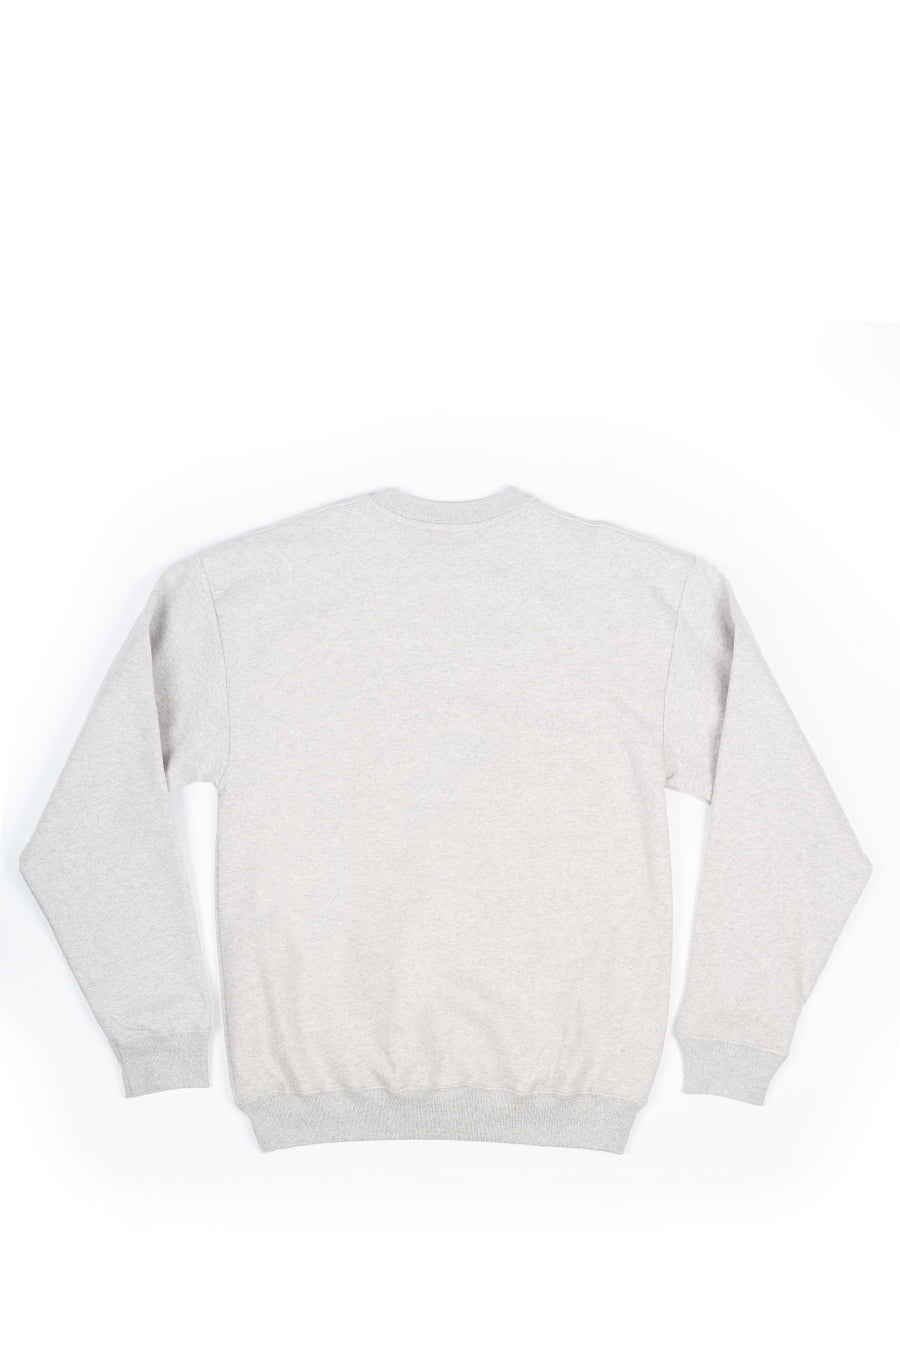 SPORTY AND RICH SCIENCE OF GOOD HEALTH CREWNECK HEATHER GRAY